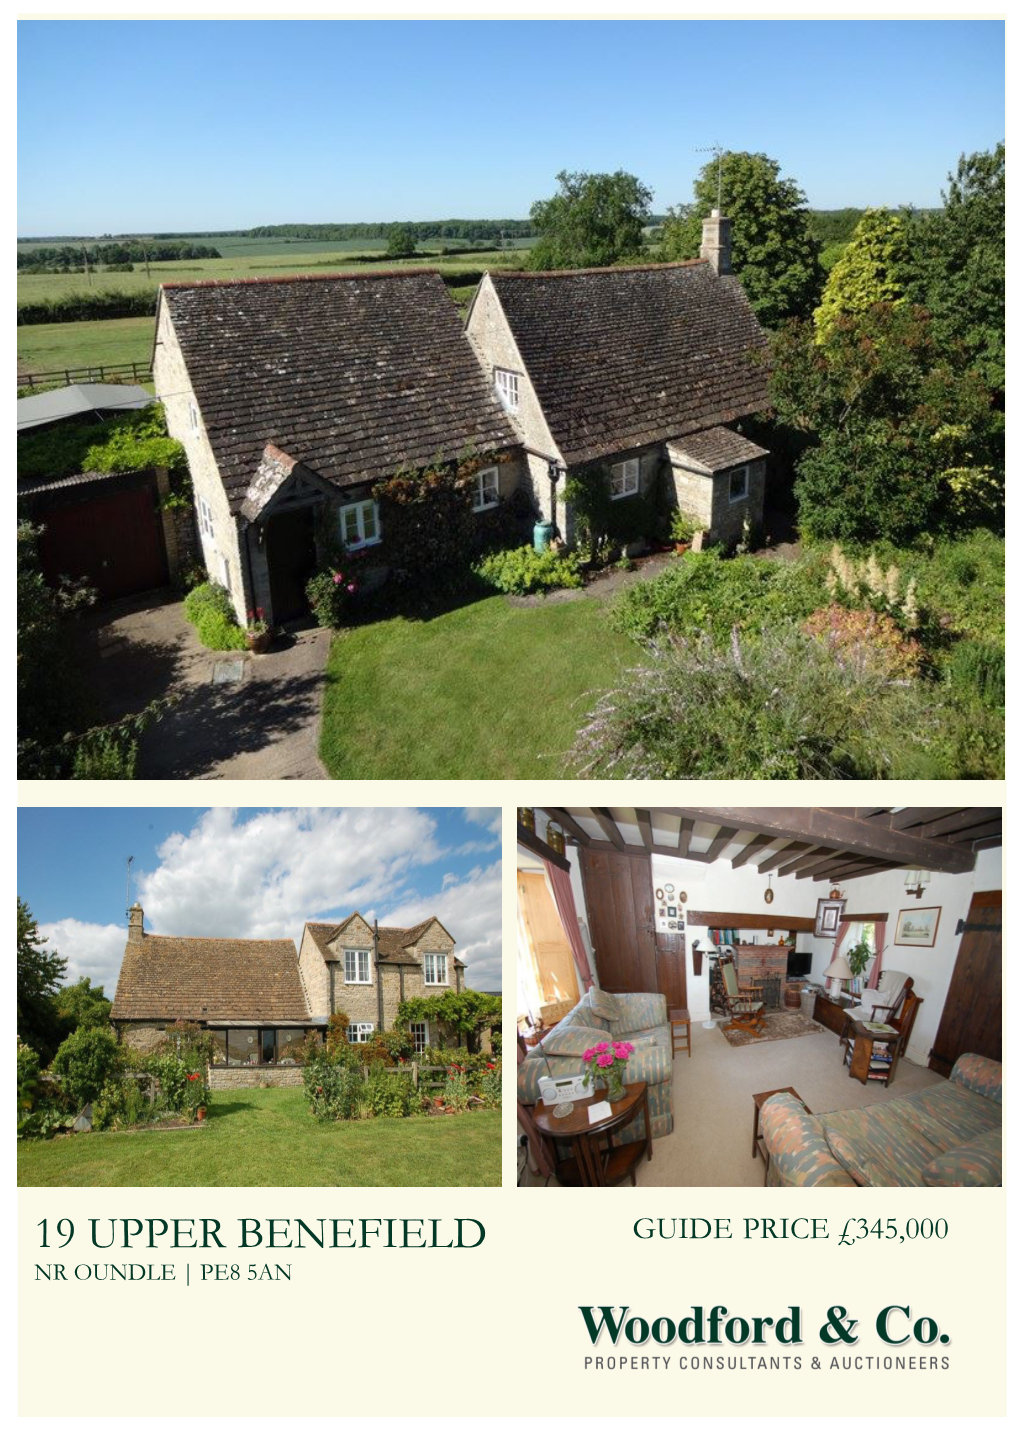 19 Upper Benefield Nr Oundle | Pe8 5An